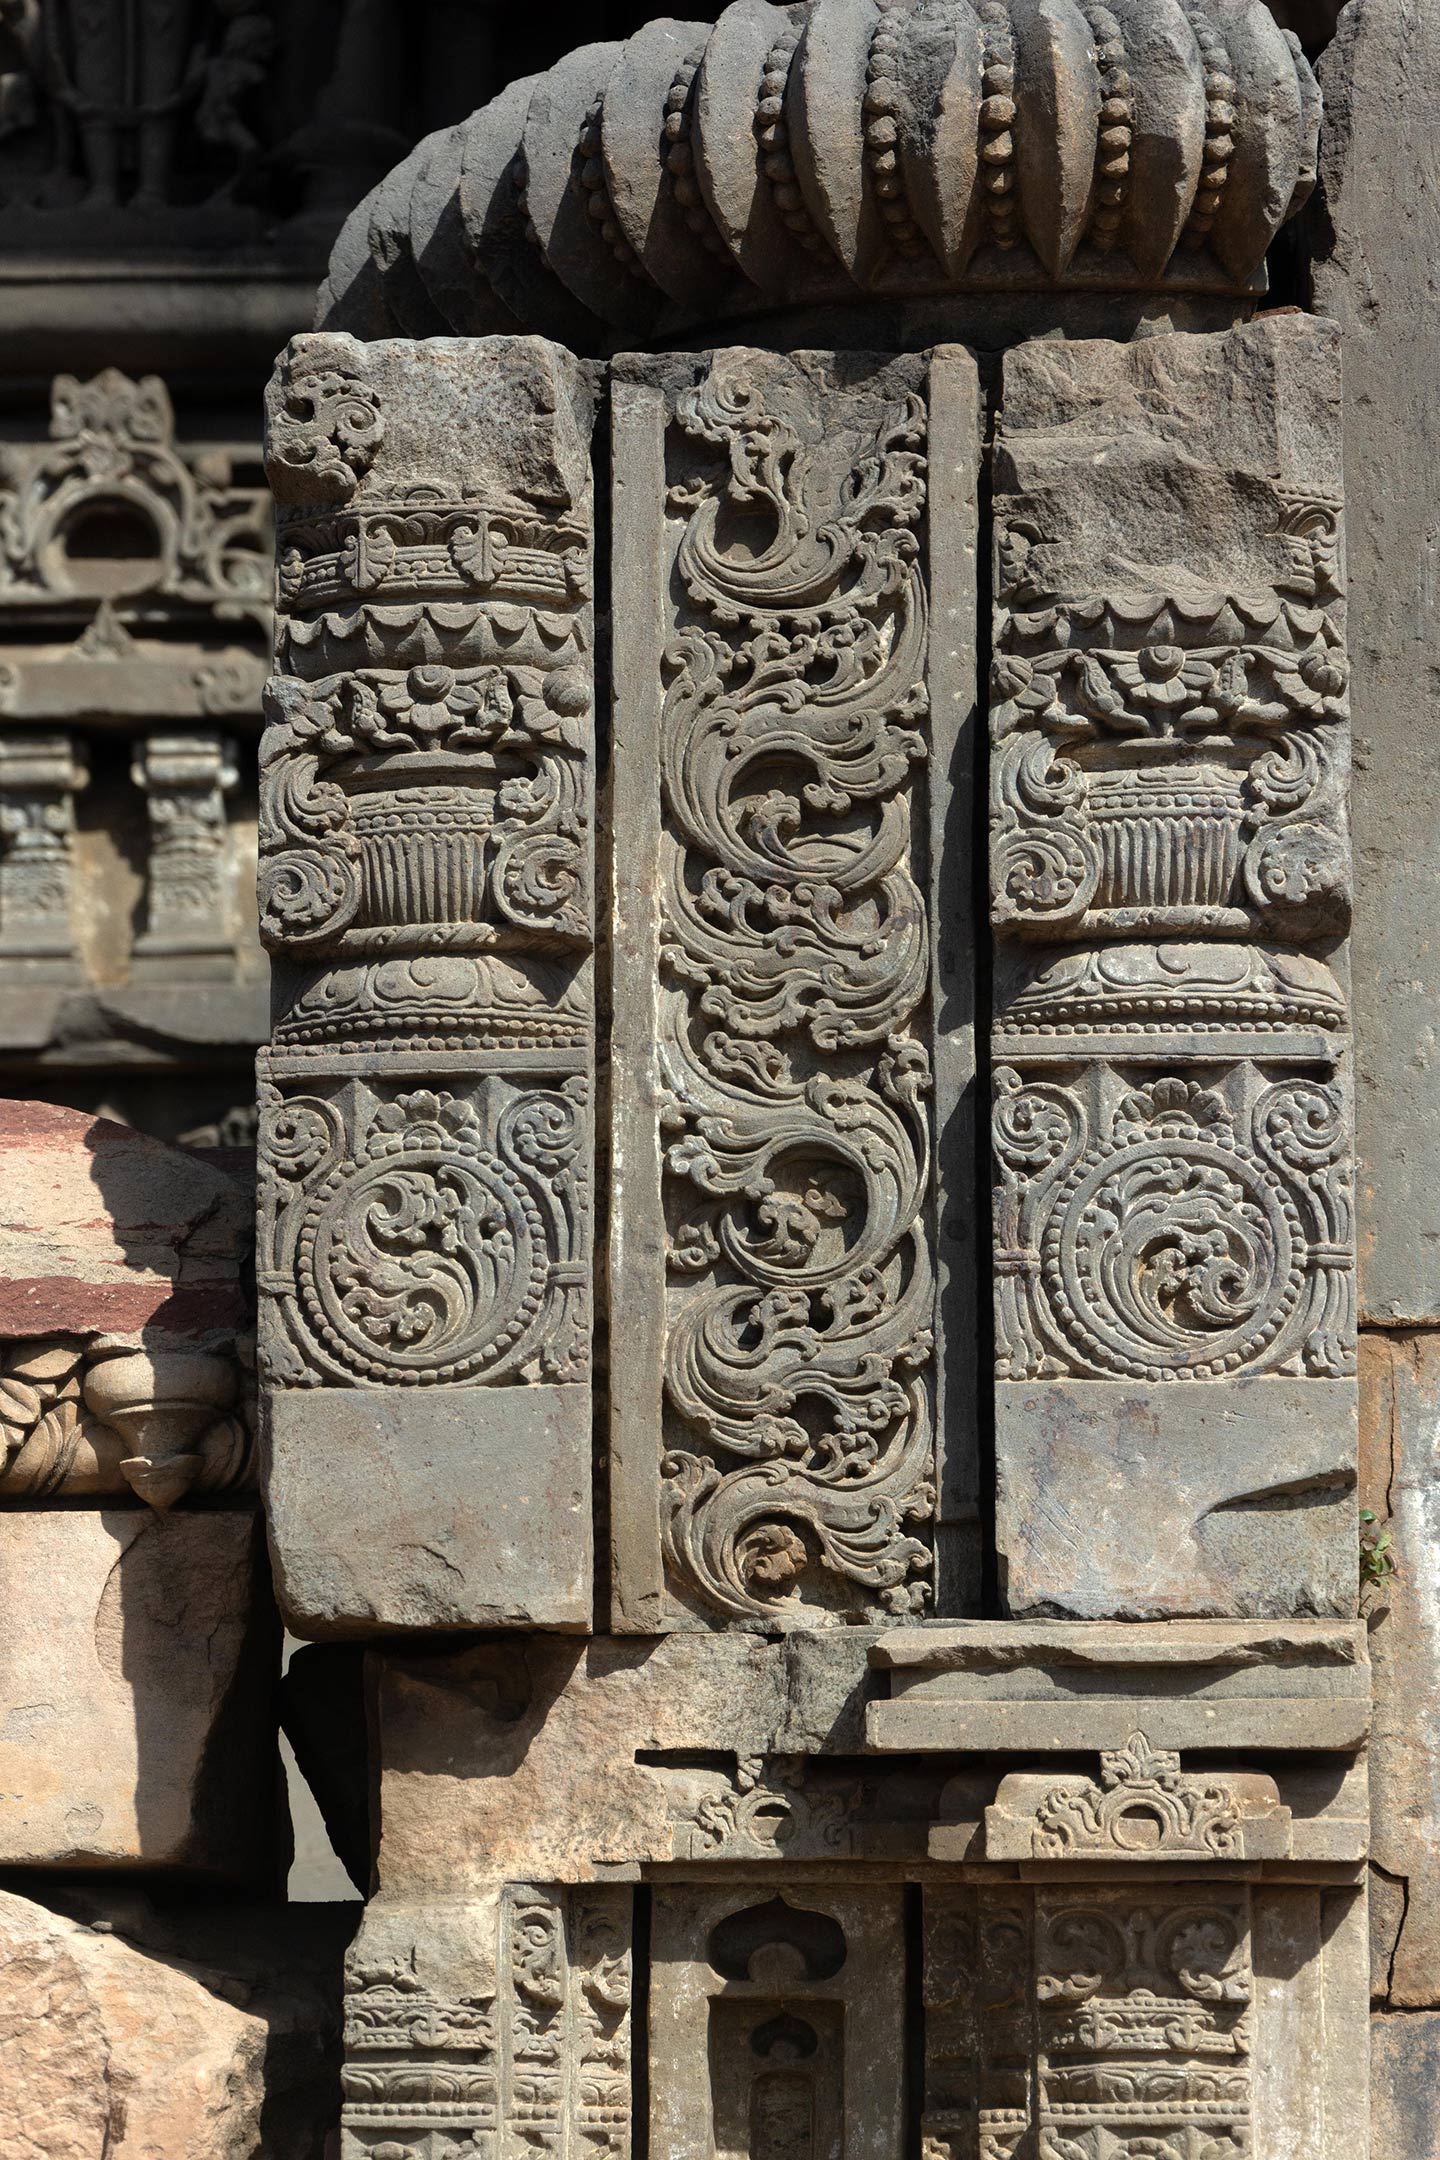 A broken section of the block features two pillars divided vertically in three sections. The kalpa lata (creeper) motif features at the base, the purna kalasha (pot of prosperity) in the central part. The top part is damaged and blooming lotuses separate the three parts. In the central part, a flowing kalpavrisksha (tree of life) motif is carved in great detail.